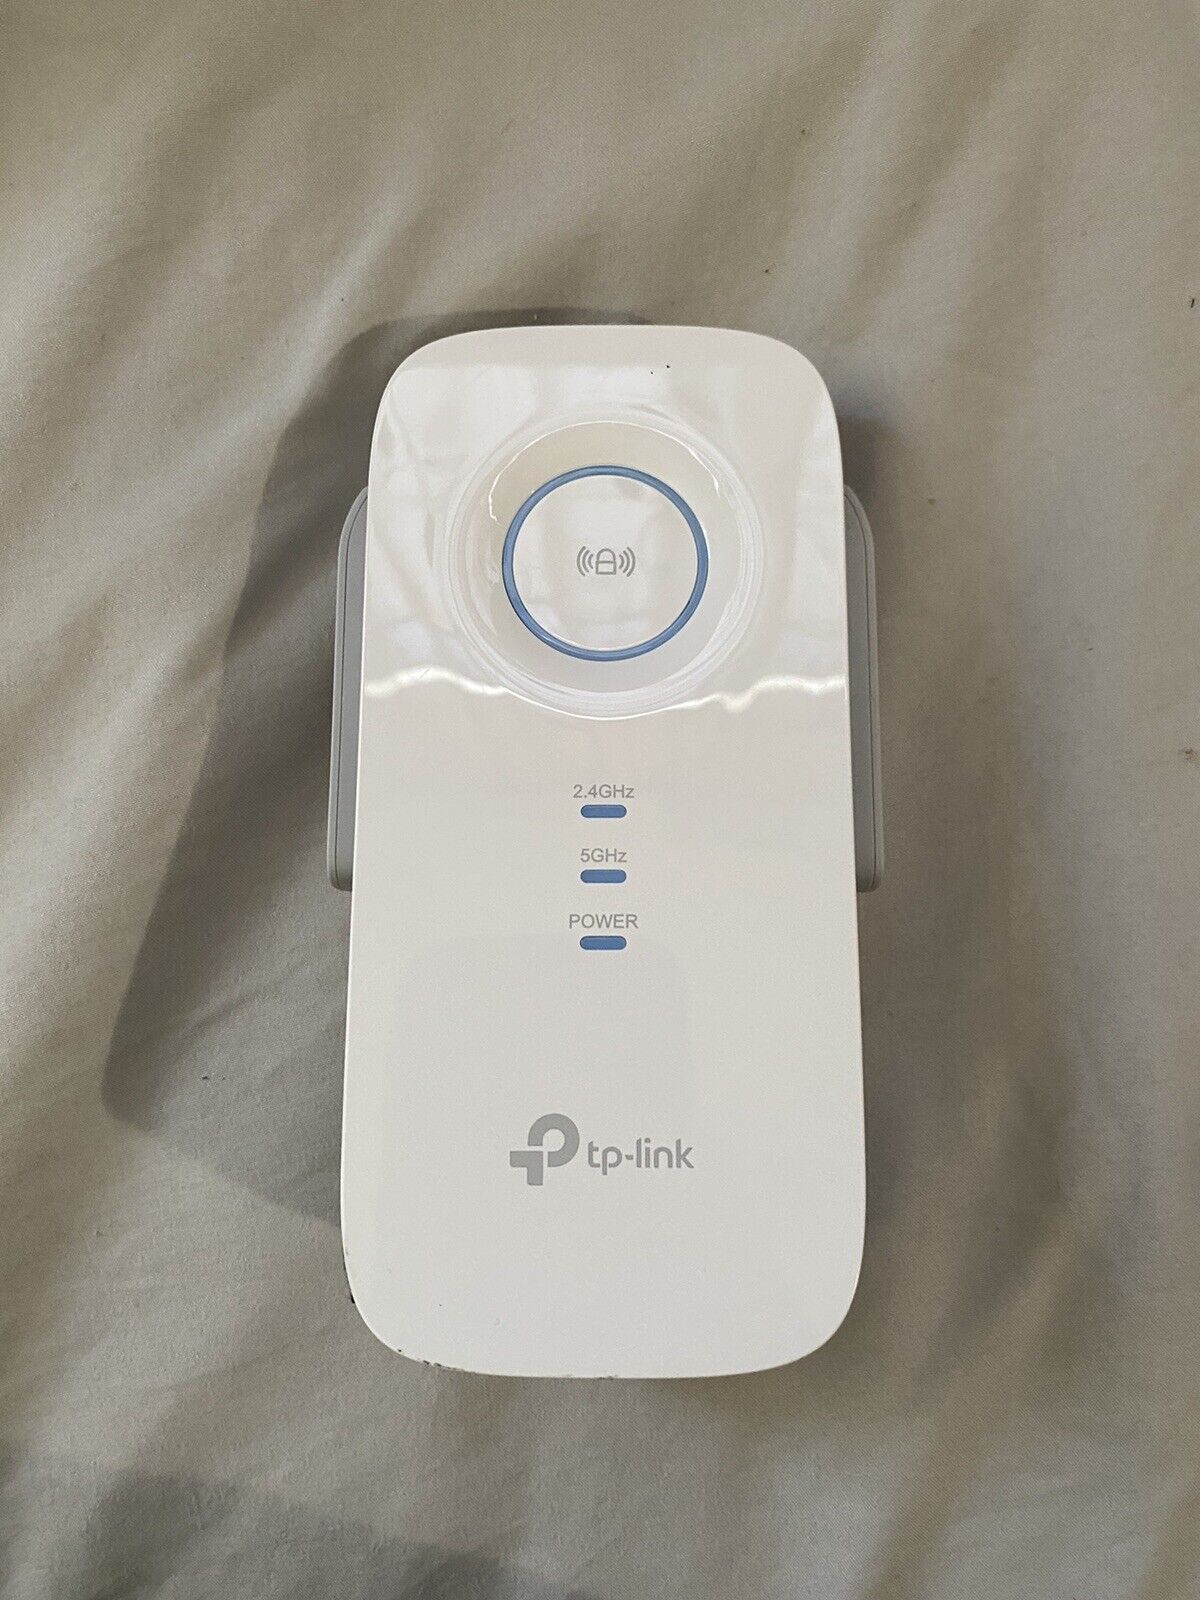 TP-Link AC1900 WiFi Extender RE550 internet booster Working Great